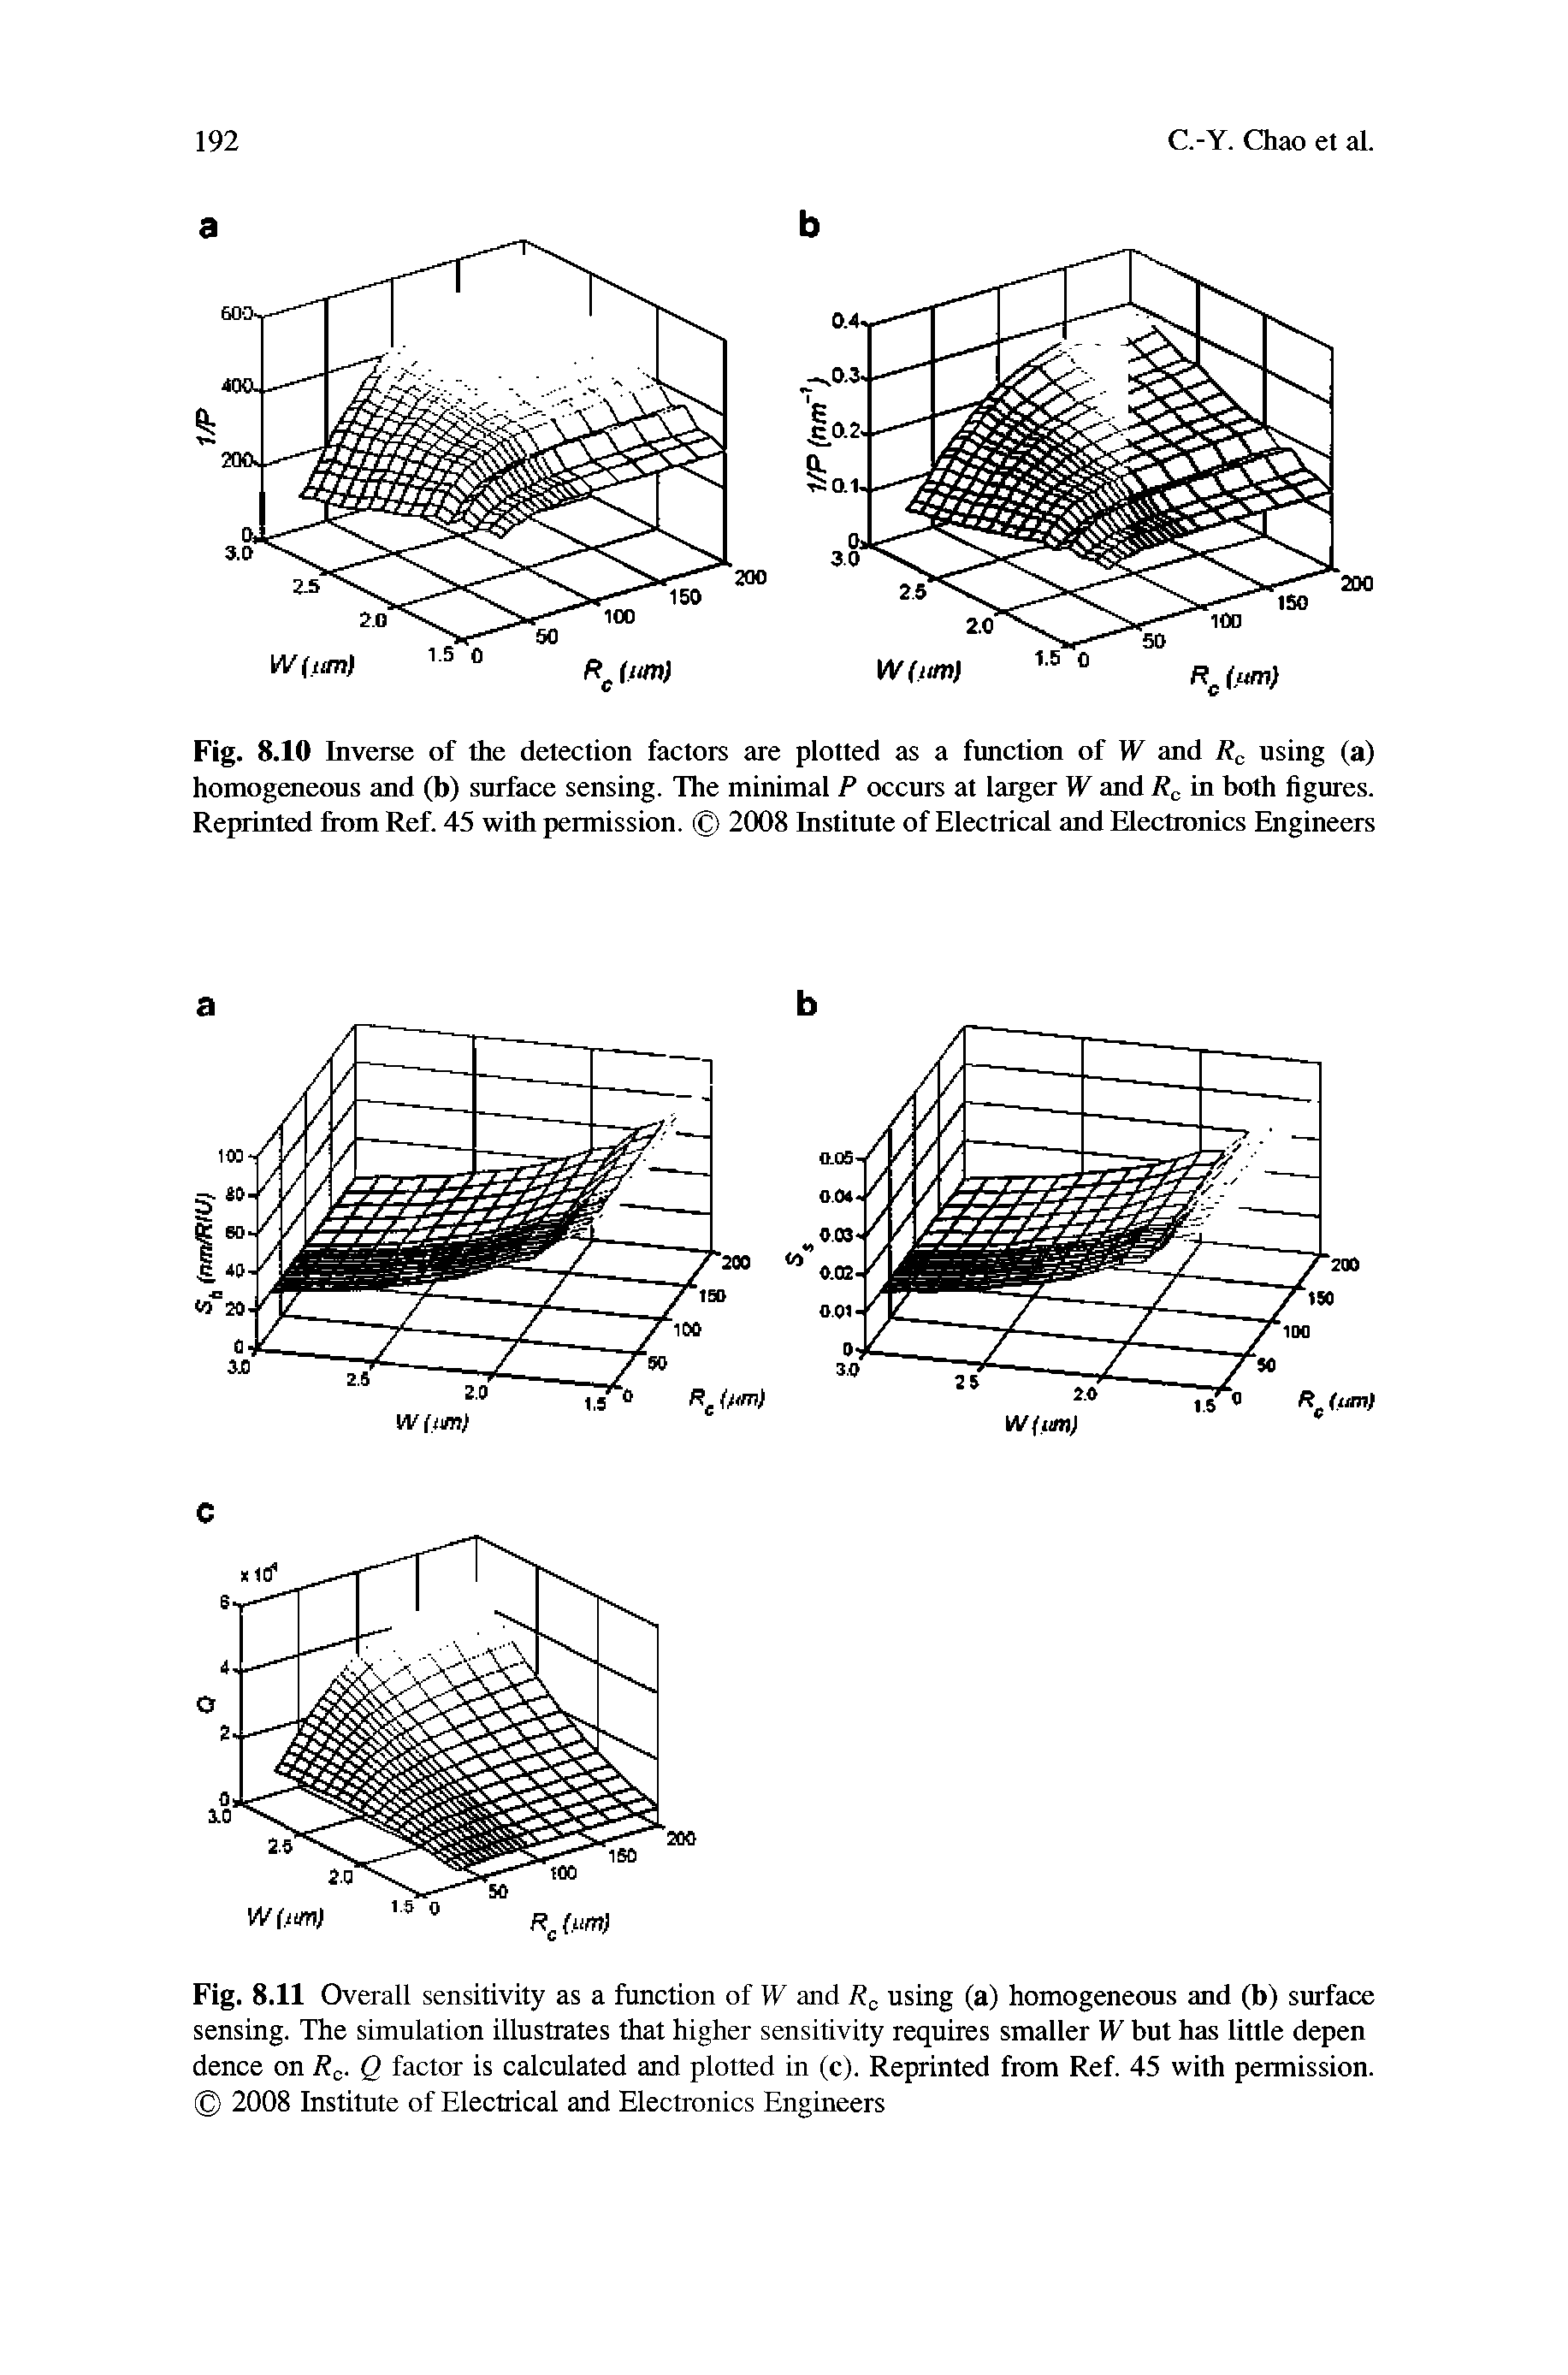 Fig. 8.11 Overall sensitivity as a function of W and R0 using (a) homogeneous and (b) surface sensing. The simulation illustrates that higher sensitivity requires smaller W but has little depen dence on Rc. Q factor is calculated and plotted in (c). Reprinted from Ref. 45 with permission. 2008 Institute of Electrical and Electronics Engineers...